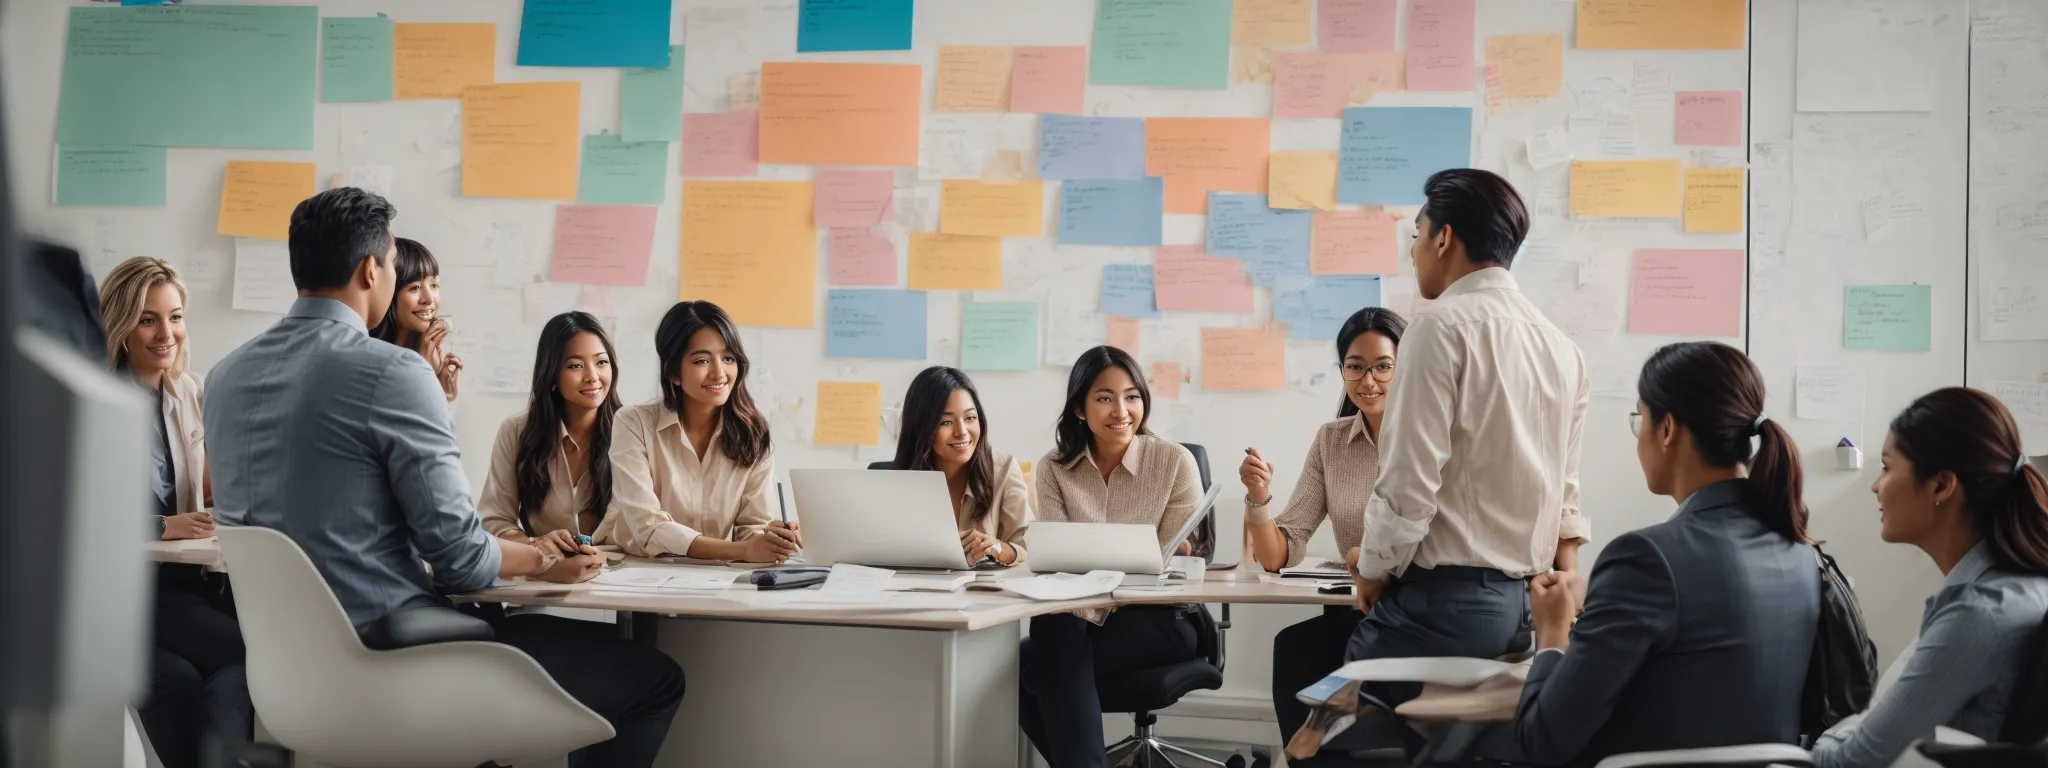 a bustling office with a diverse team engaging in a dynamic brainstorming session near a whiteboard filled with colorful marketing strategy diagrams.